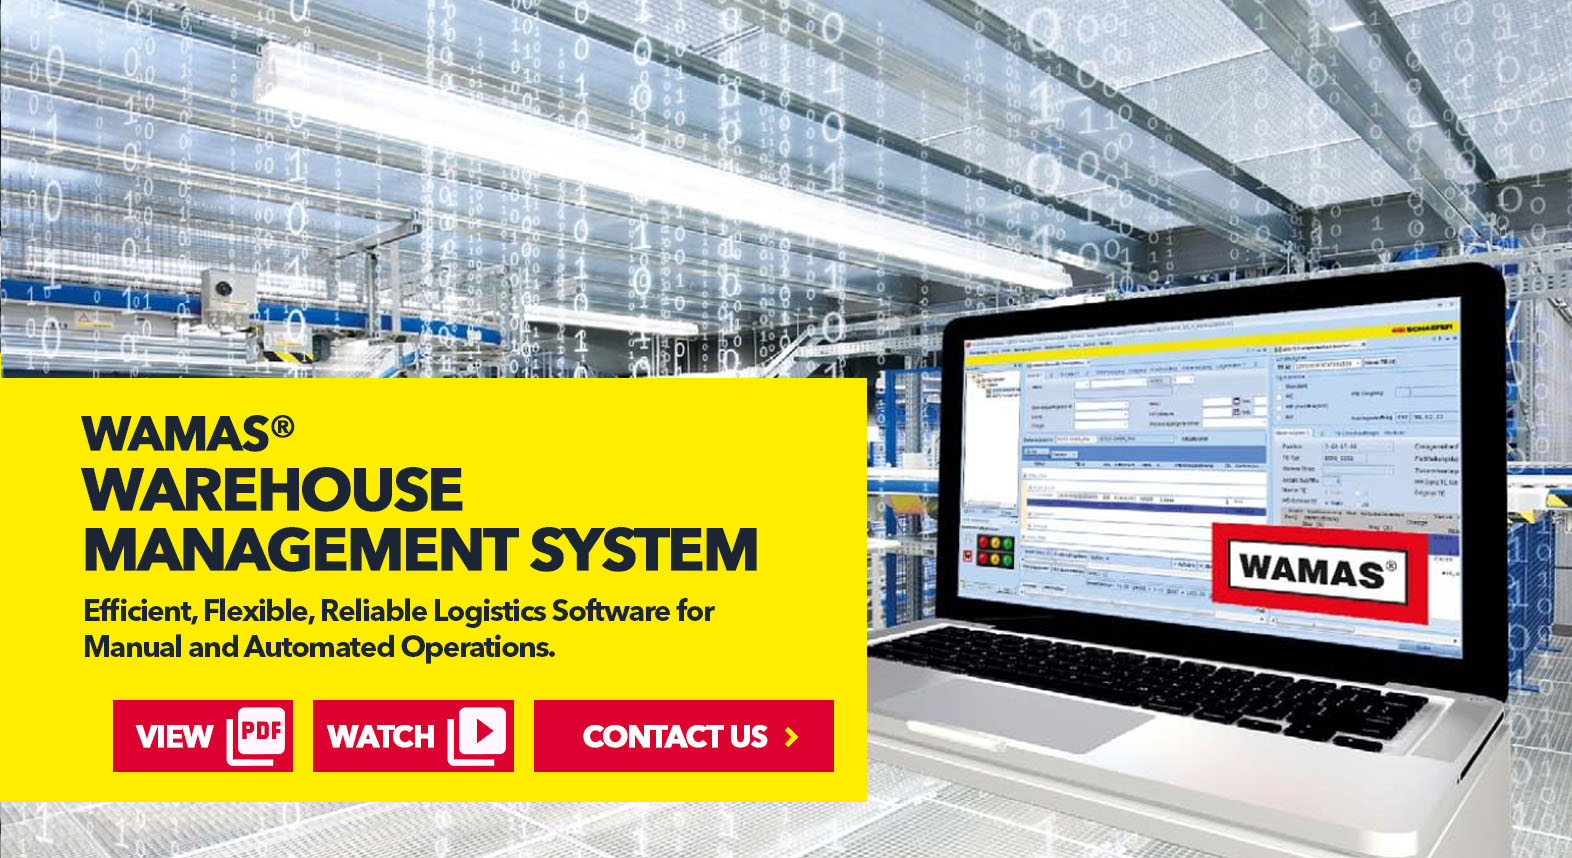 WAMAS® Warehouse Management System by SSI Schaefer USA Download Guide, Watch Video, Contact Us. www.chaefershelving.com